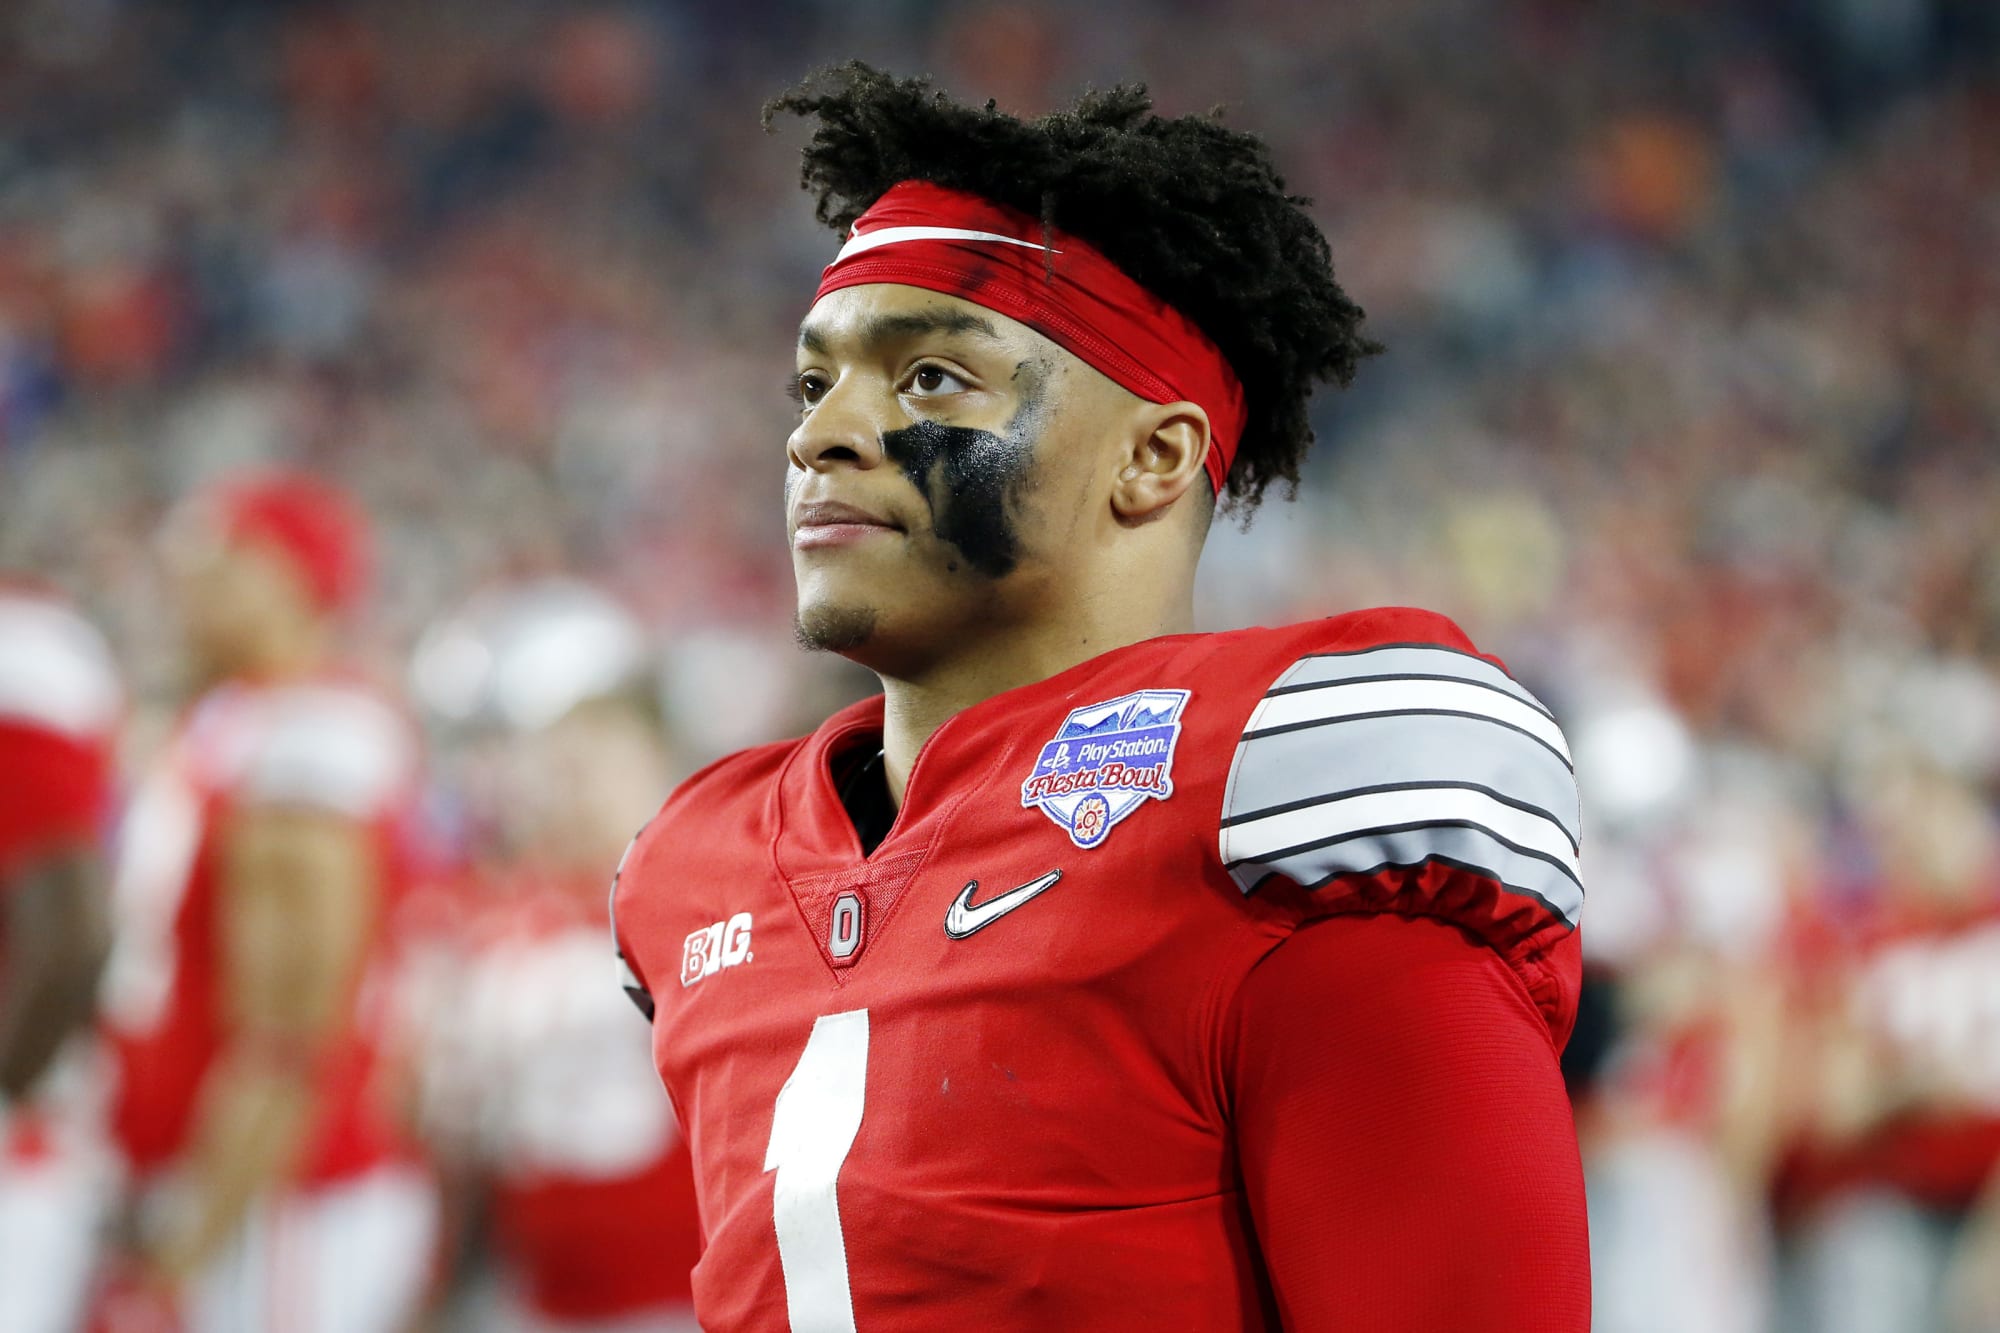 Ohio State Football Justin Fields is the 2020 Heisman favorite